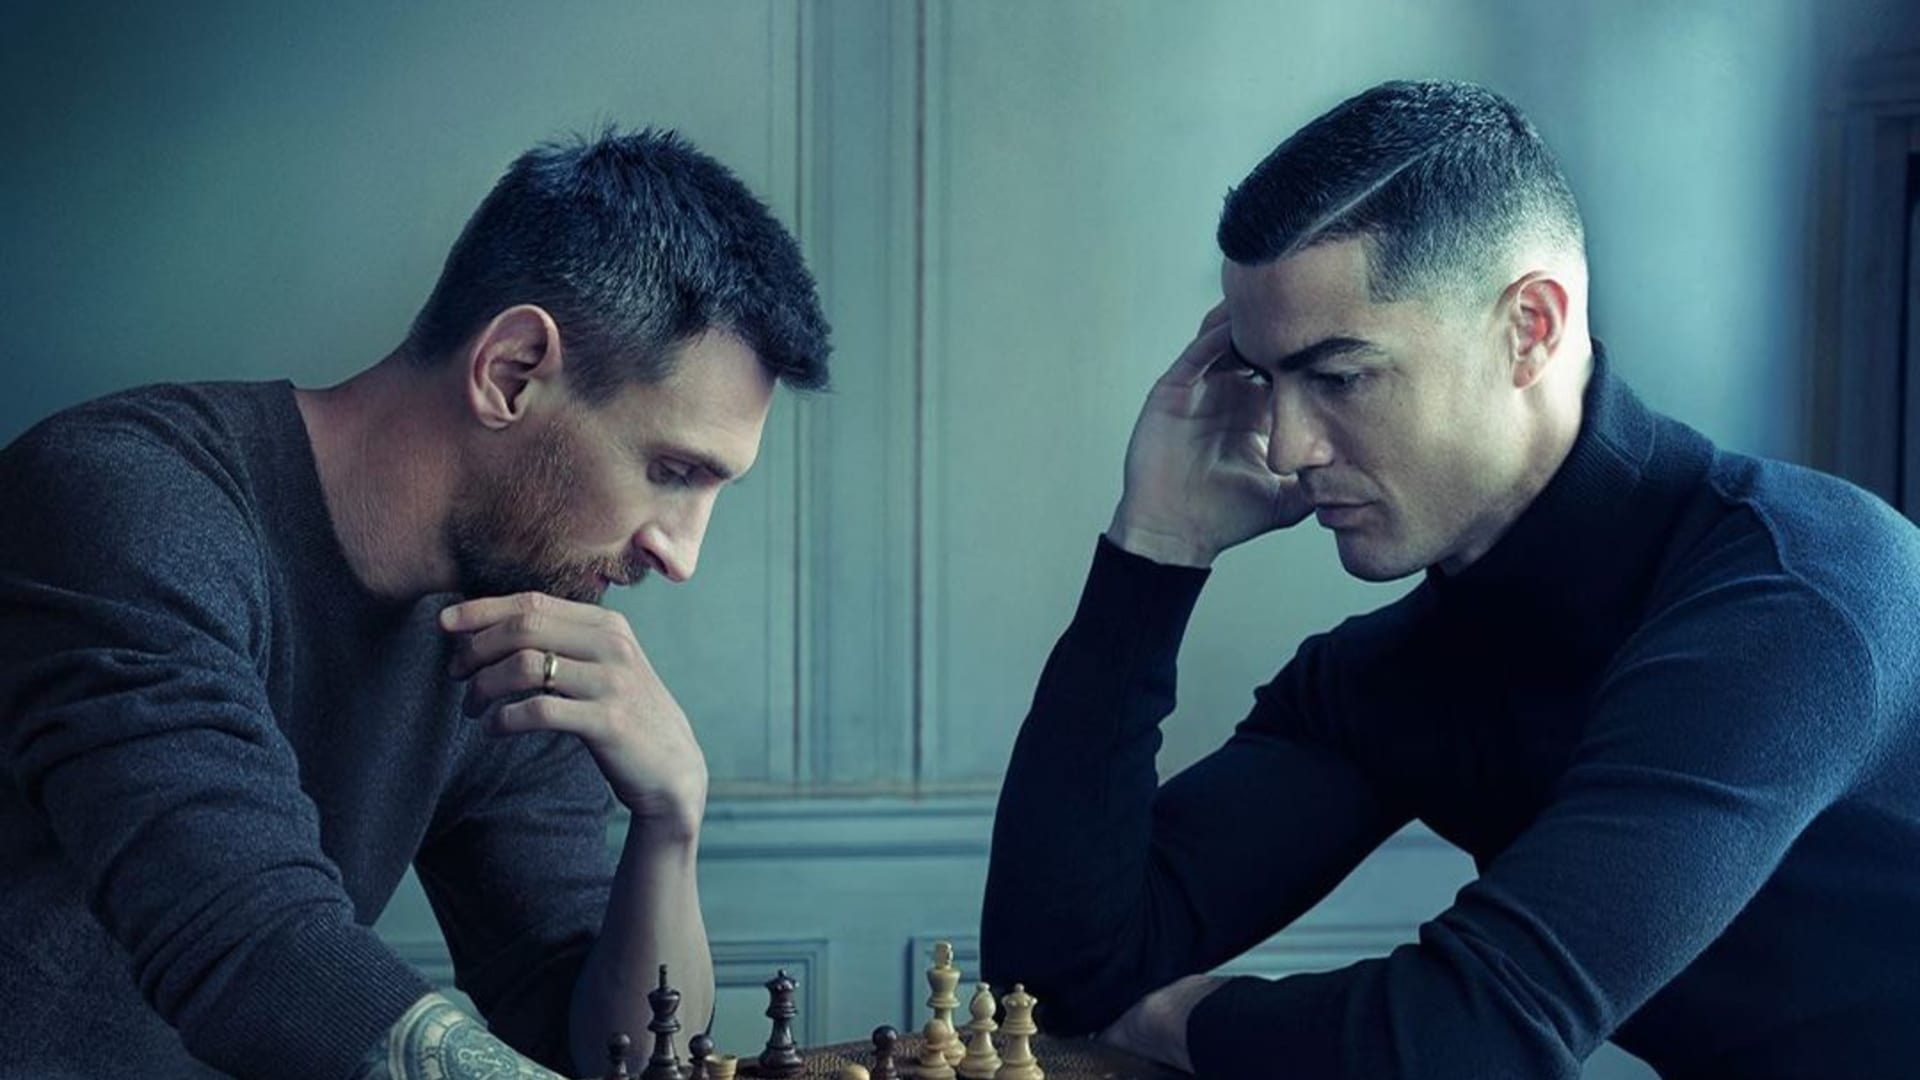 Behind-the-scenes footage reveals Messi and Ronaldo didn't actually meet  for iconic chess photo - Football